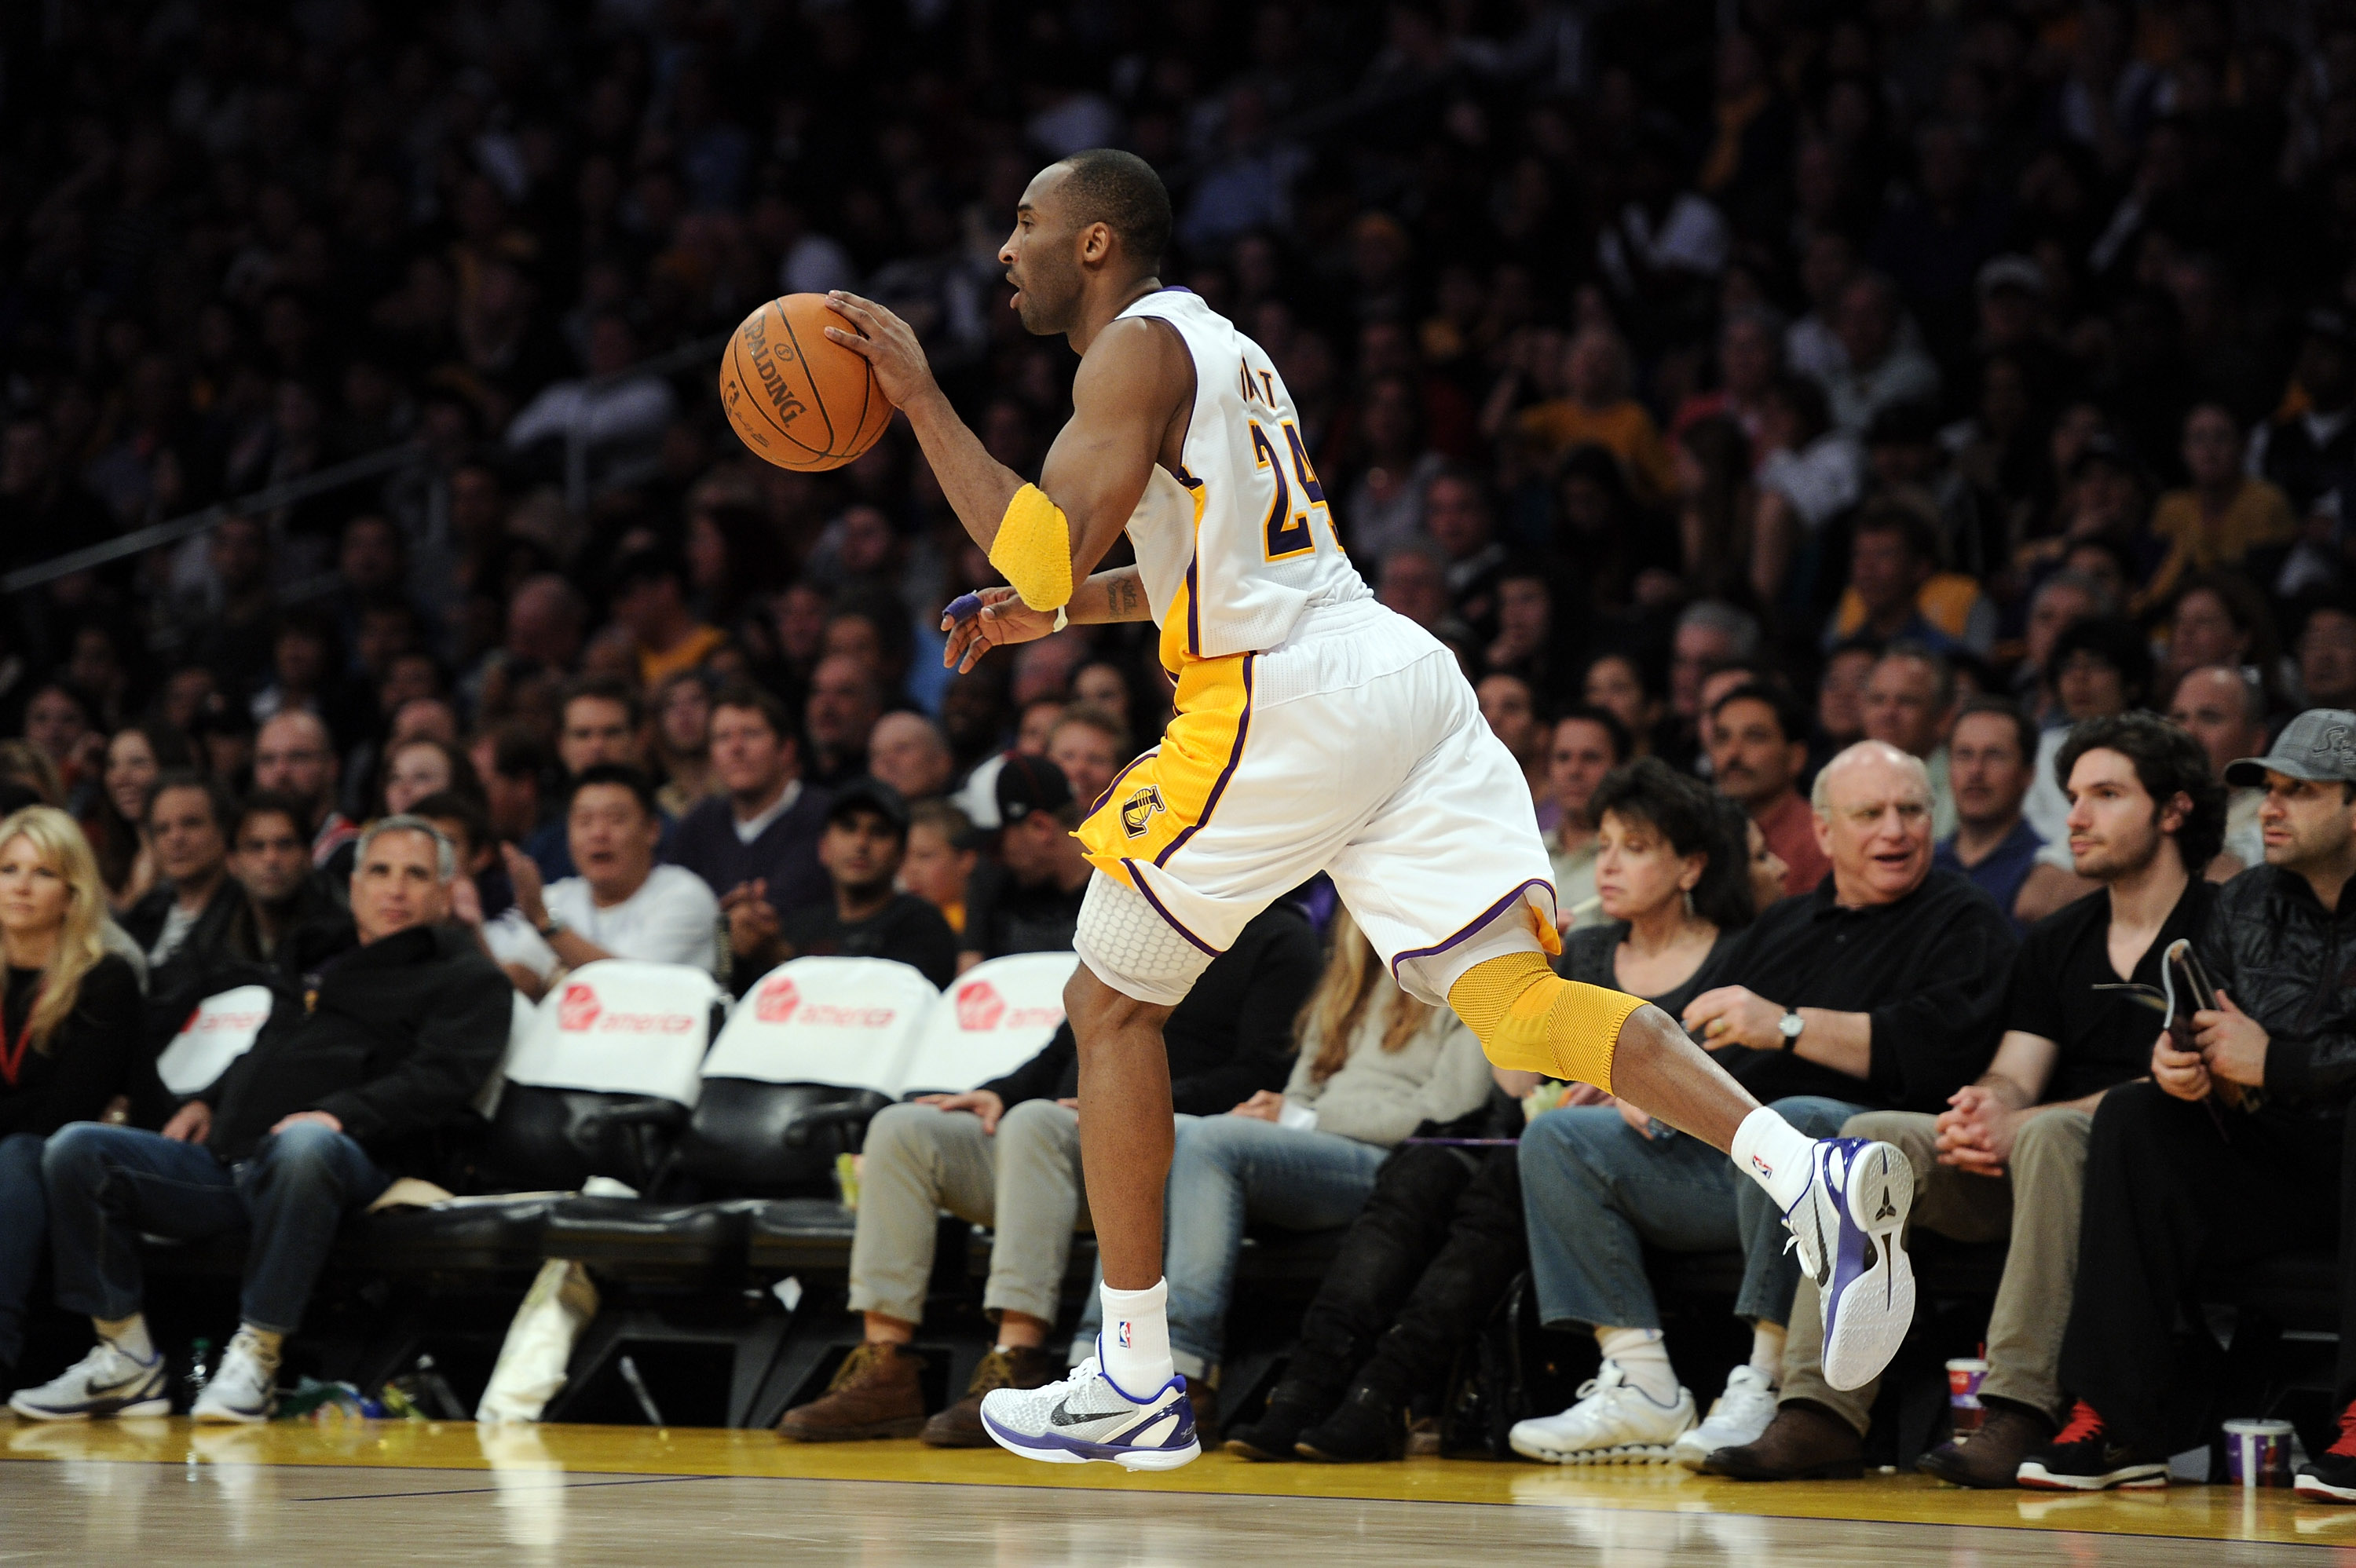 HD wallpaper of Kobe Bryant flying for reverse slam dunk in one his last  games in NBA (vs Grizzlies) that took place few…